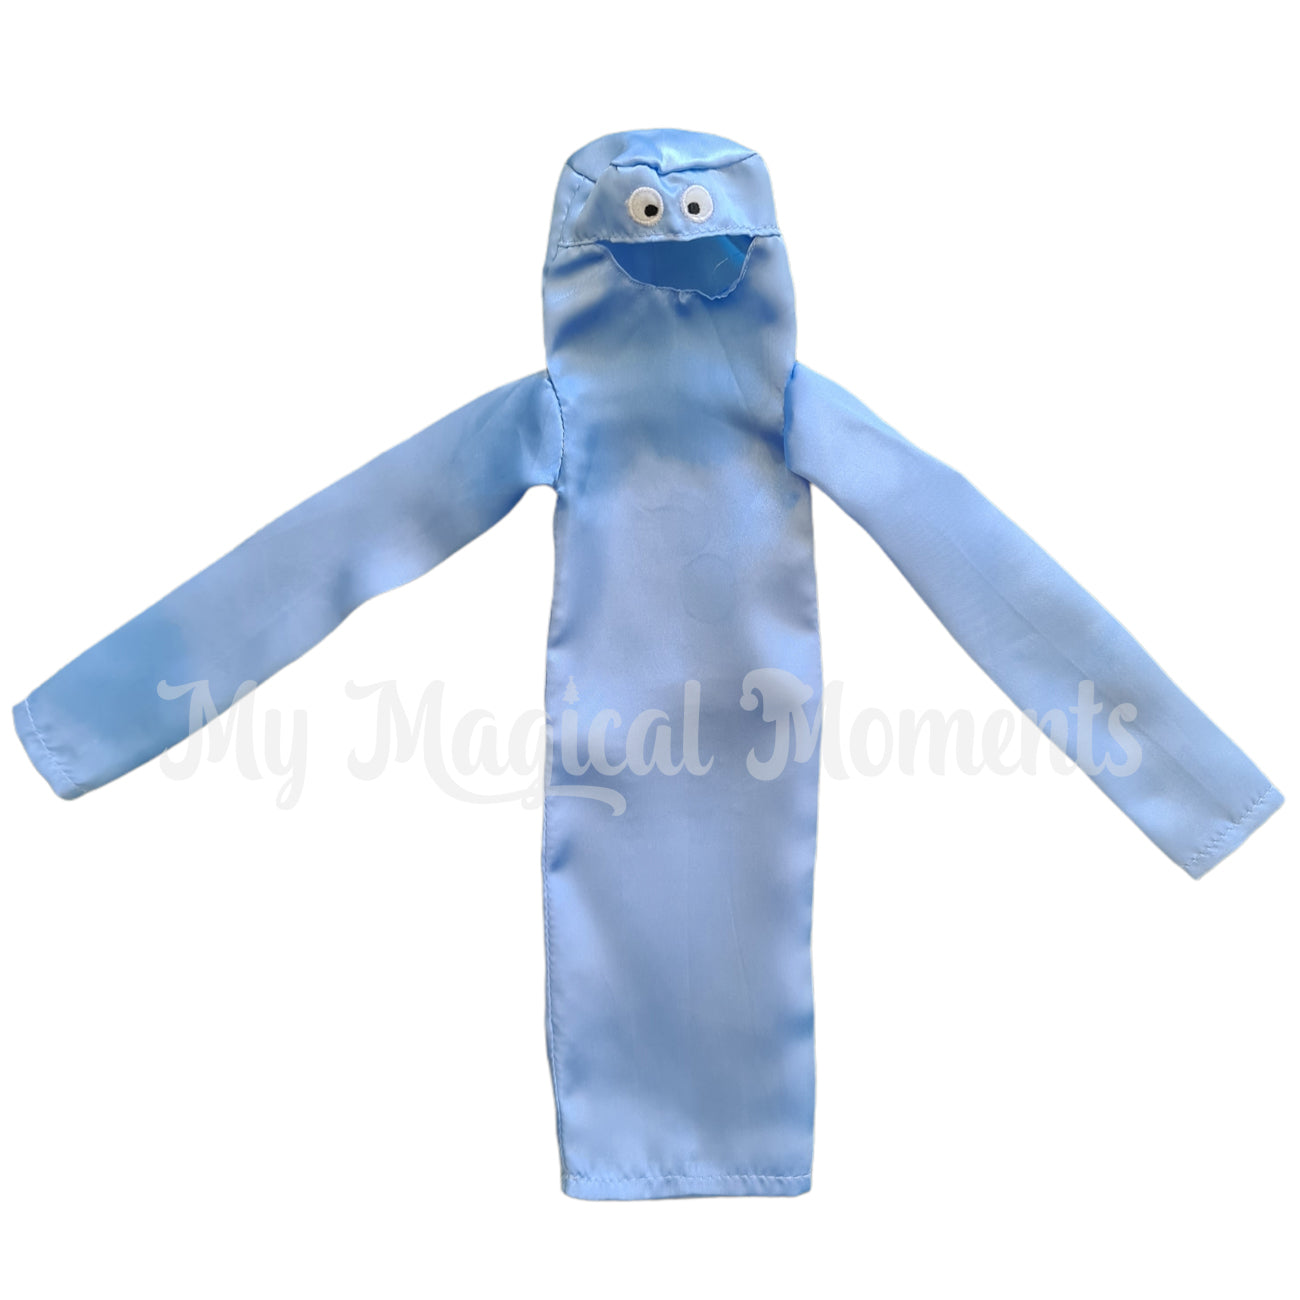 Blue Wacky waving inflatable costume for the elf